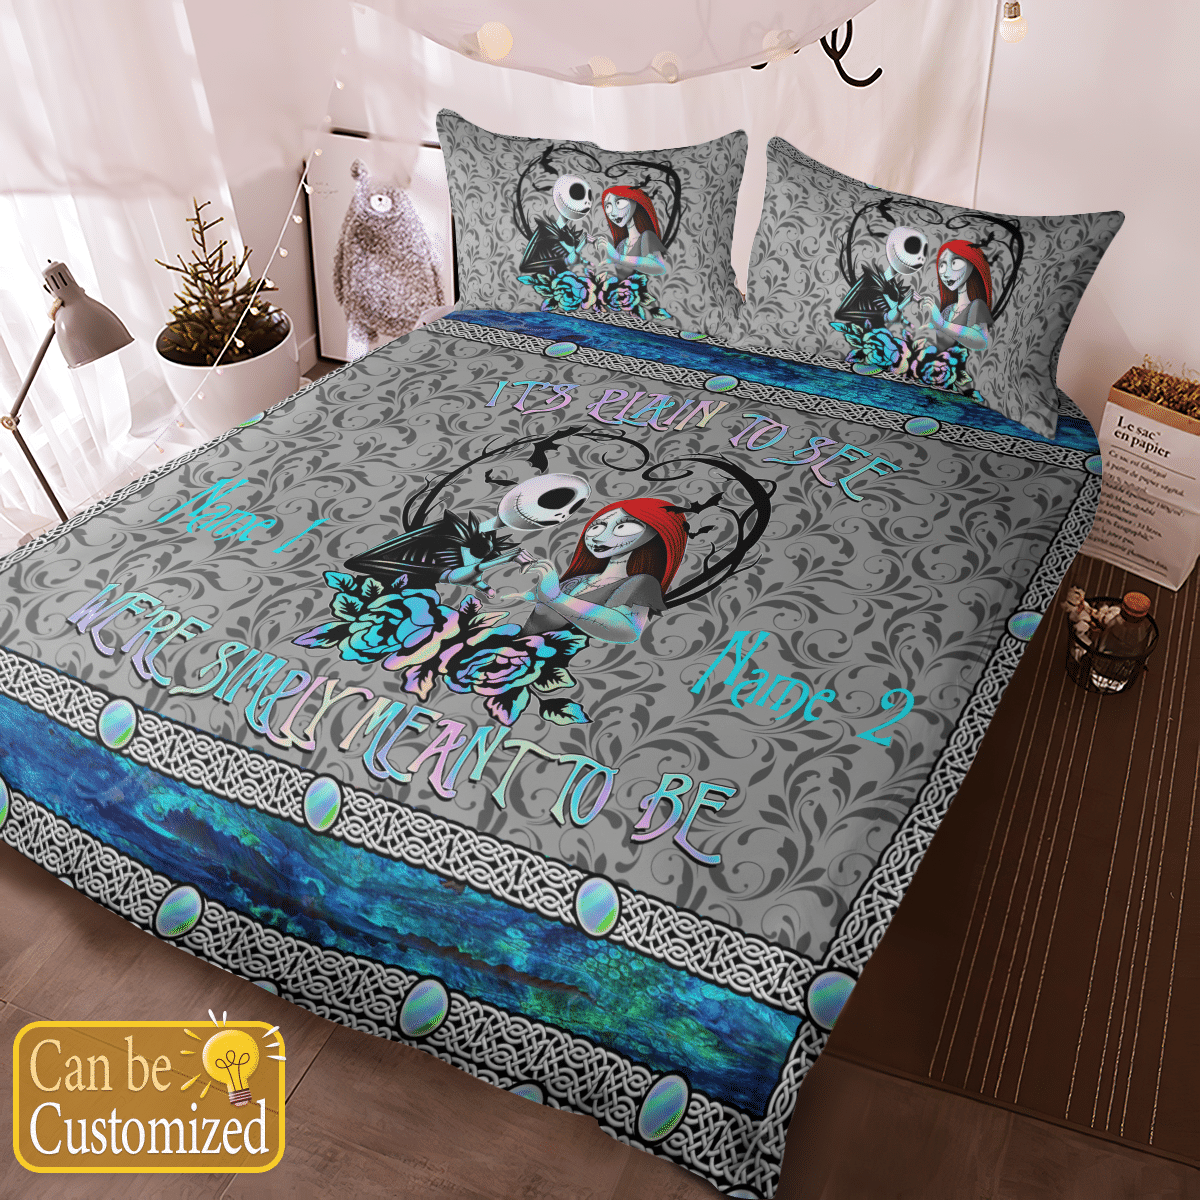 Personalized We're Simply Meant To Be Bedding Set